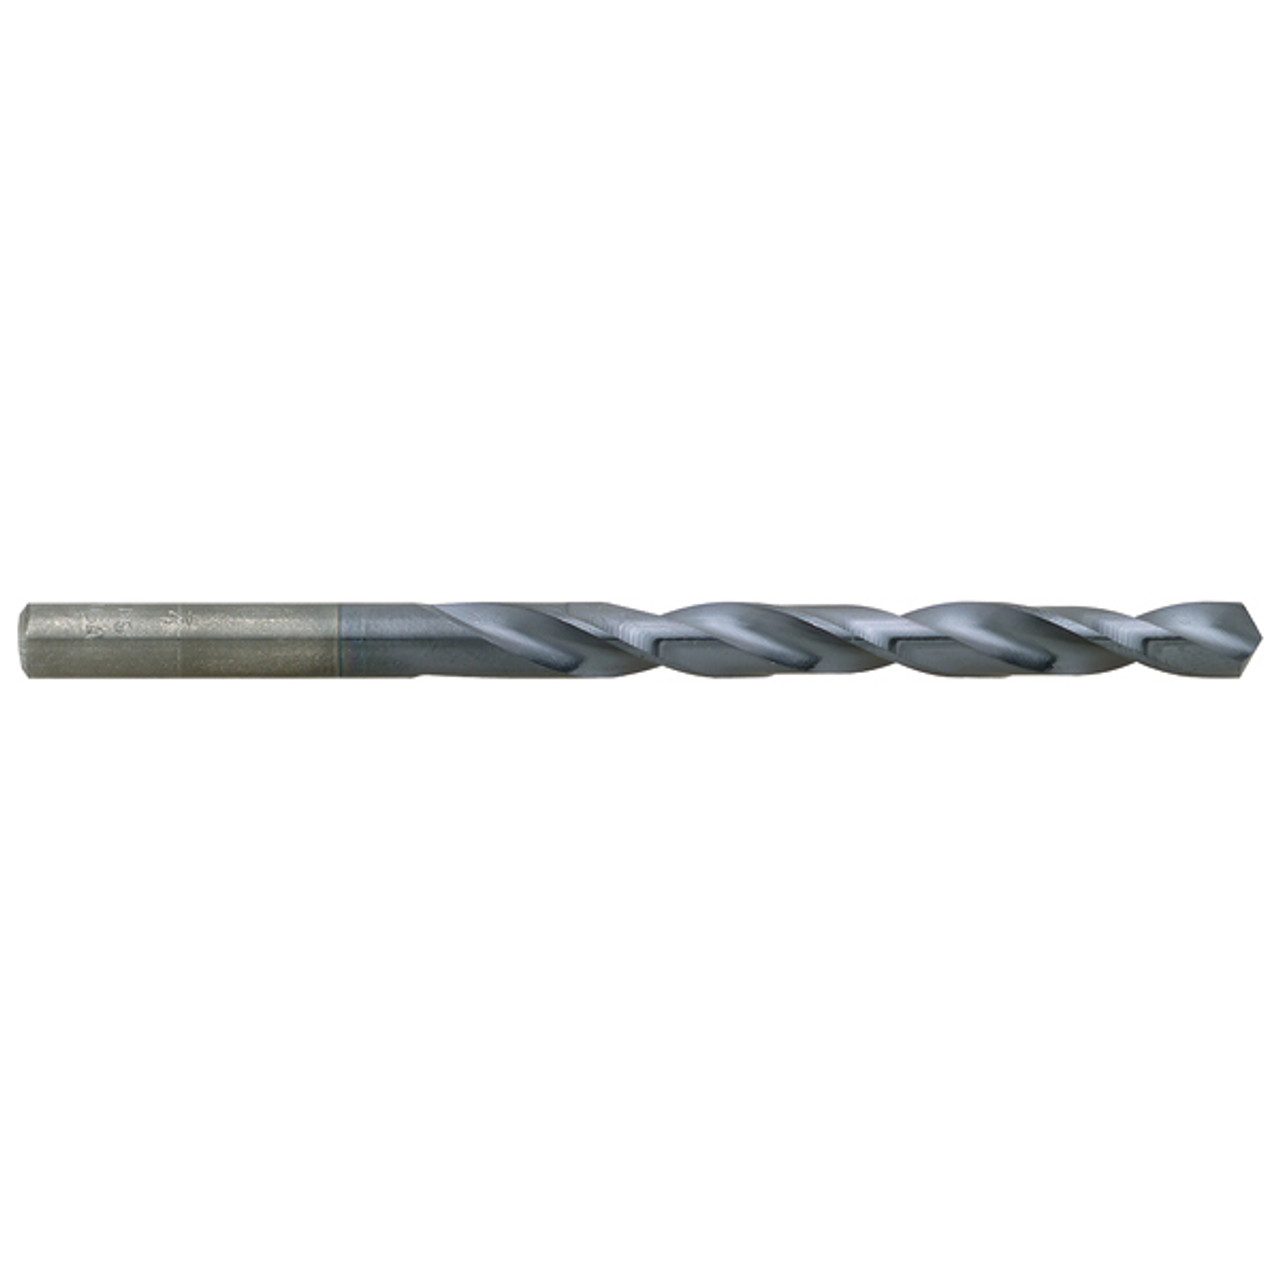 09-003-225      Y A3-TIALN HSS DRILLCOATED